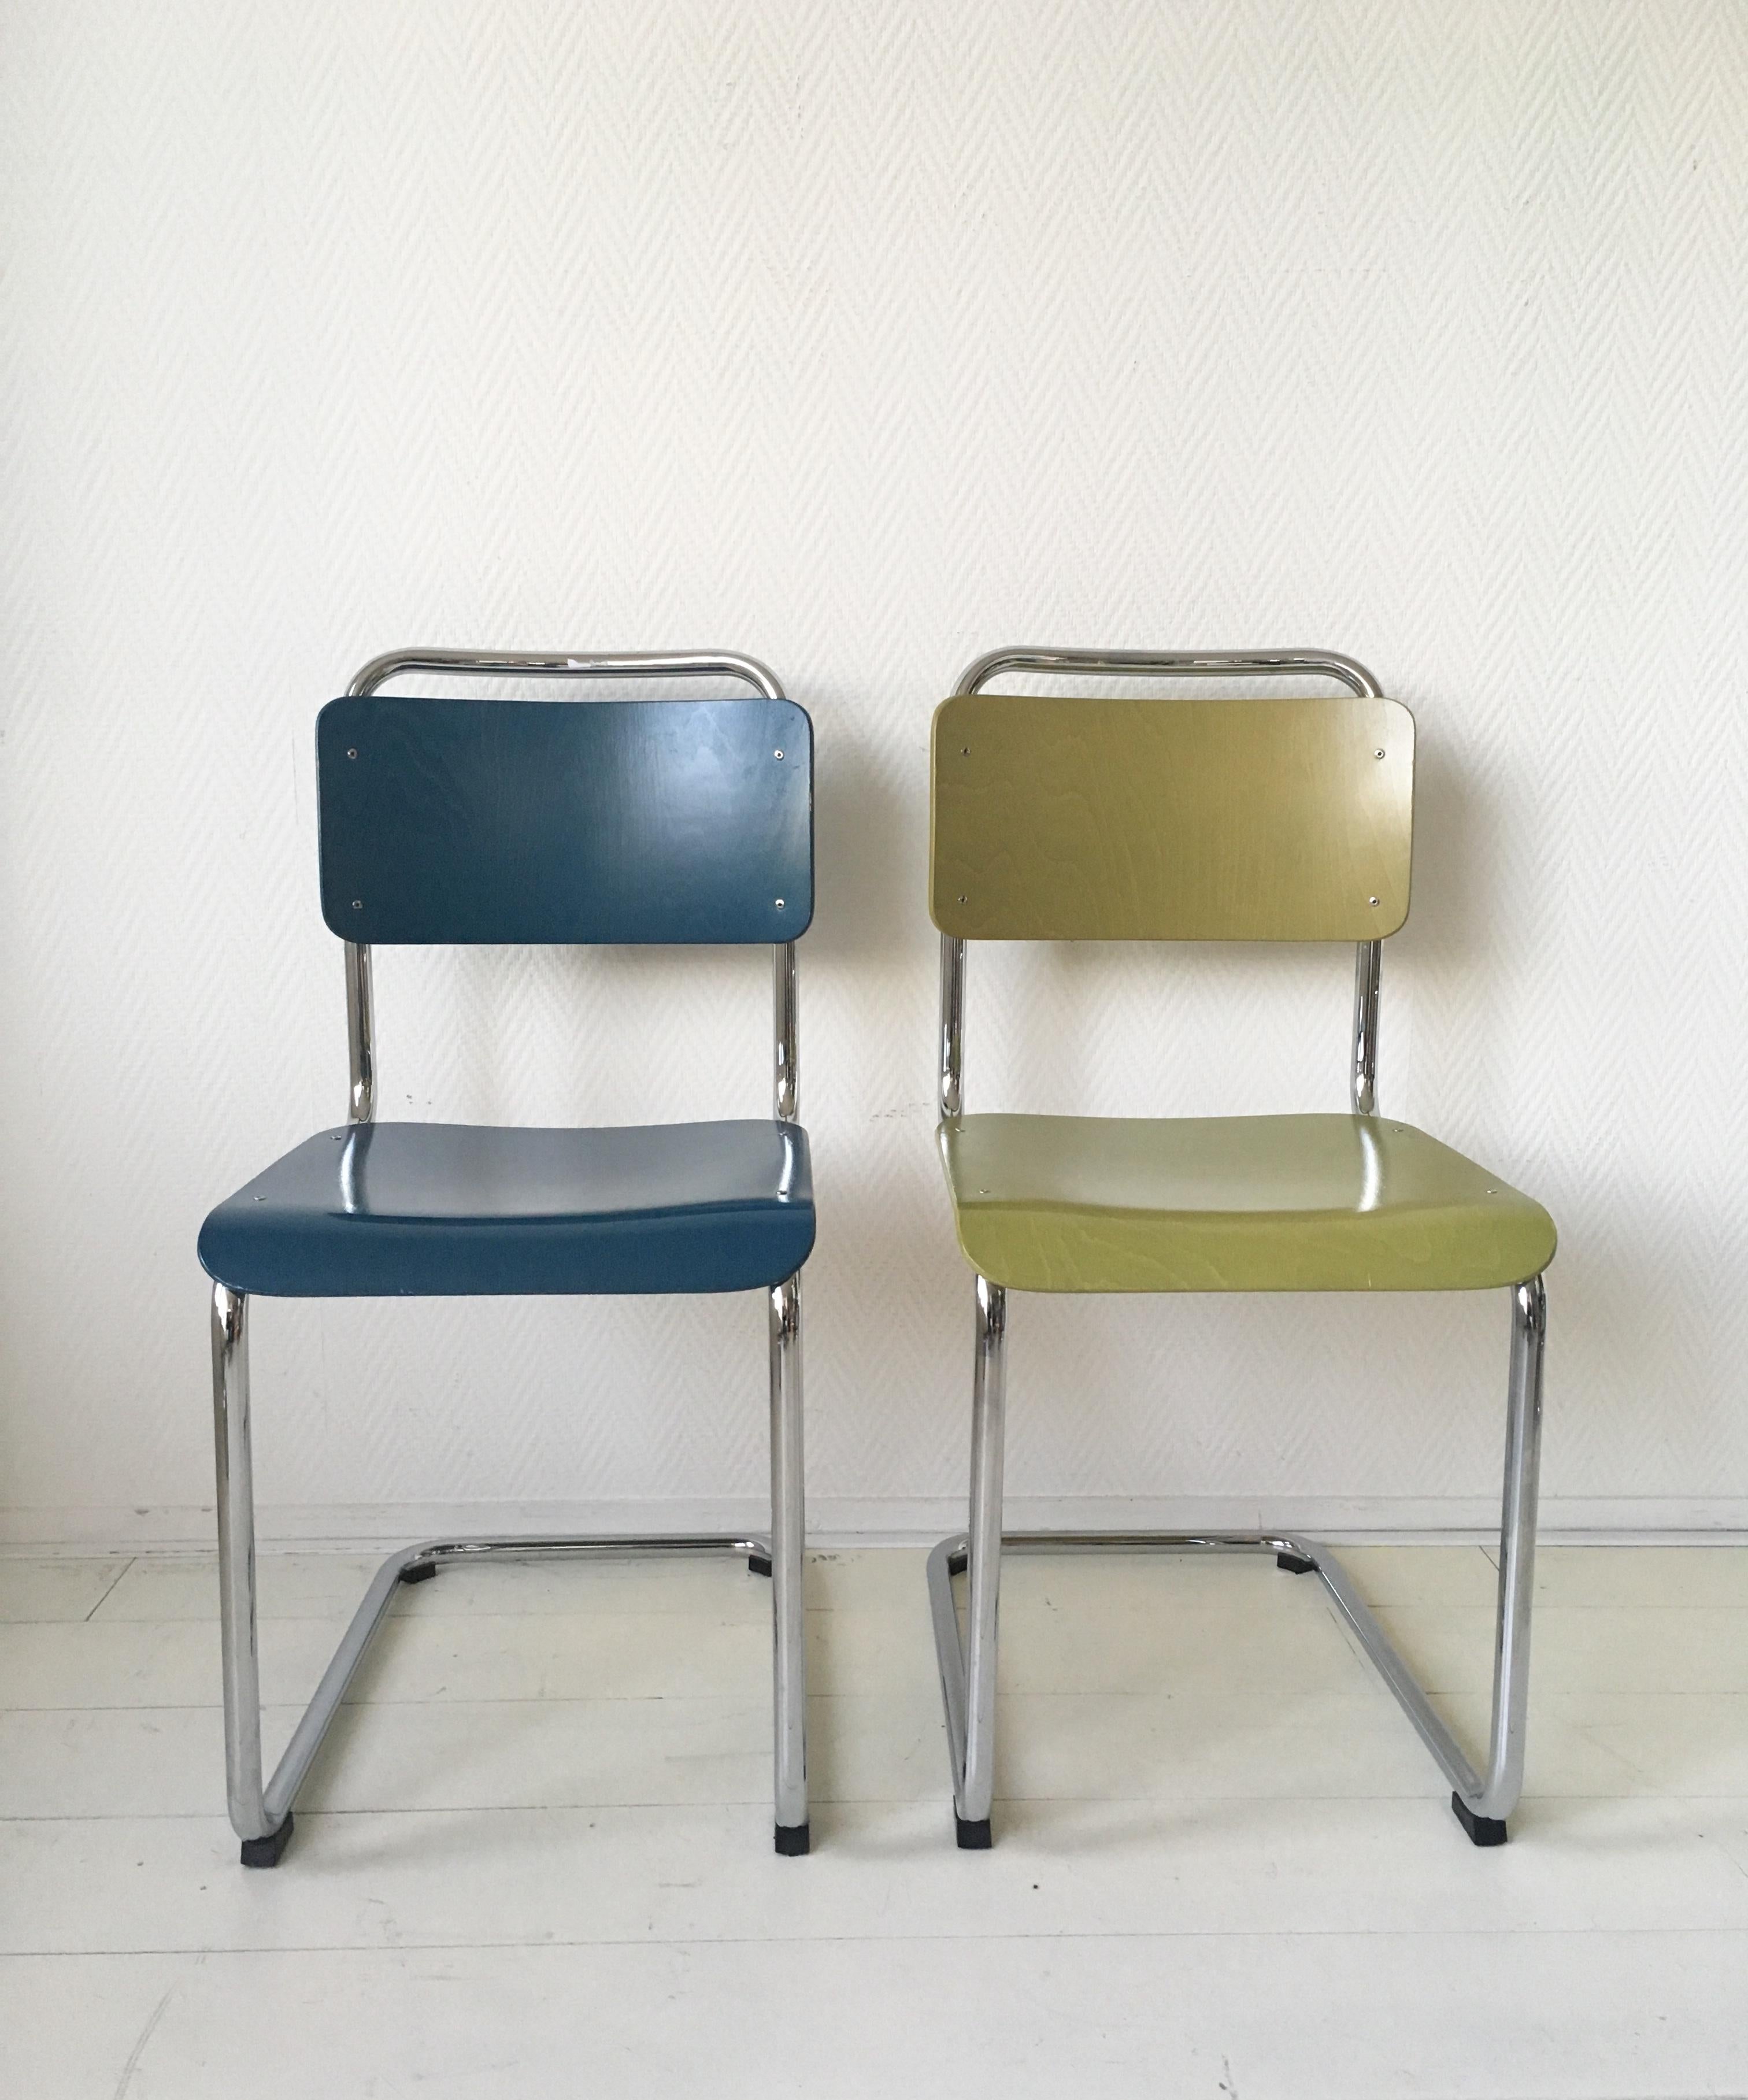 This wonderful set of four tubular dining room chairs, consist of two yellow pieces and two blue ones. They were designed by W.H. Gispen in the 1930s. Produced by license of Gispen International B.V. to B.V. Gebroeders van der Stroom. The pieces are